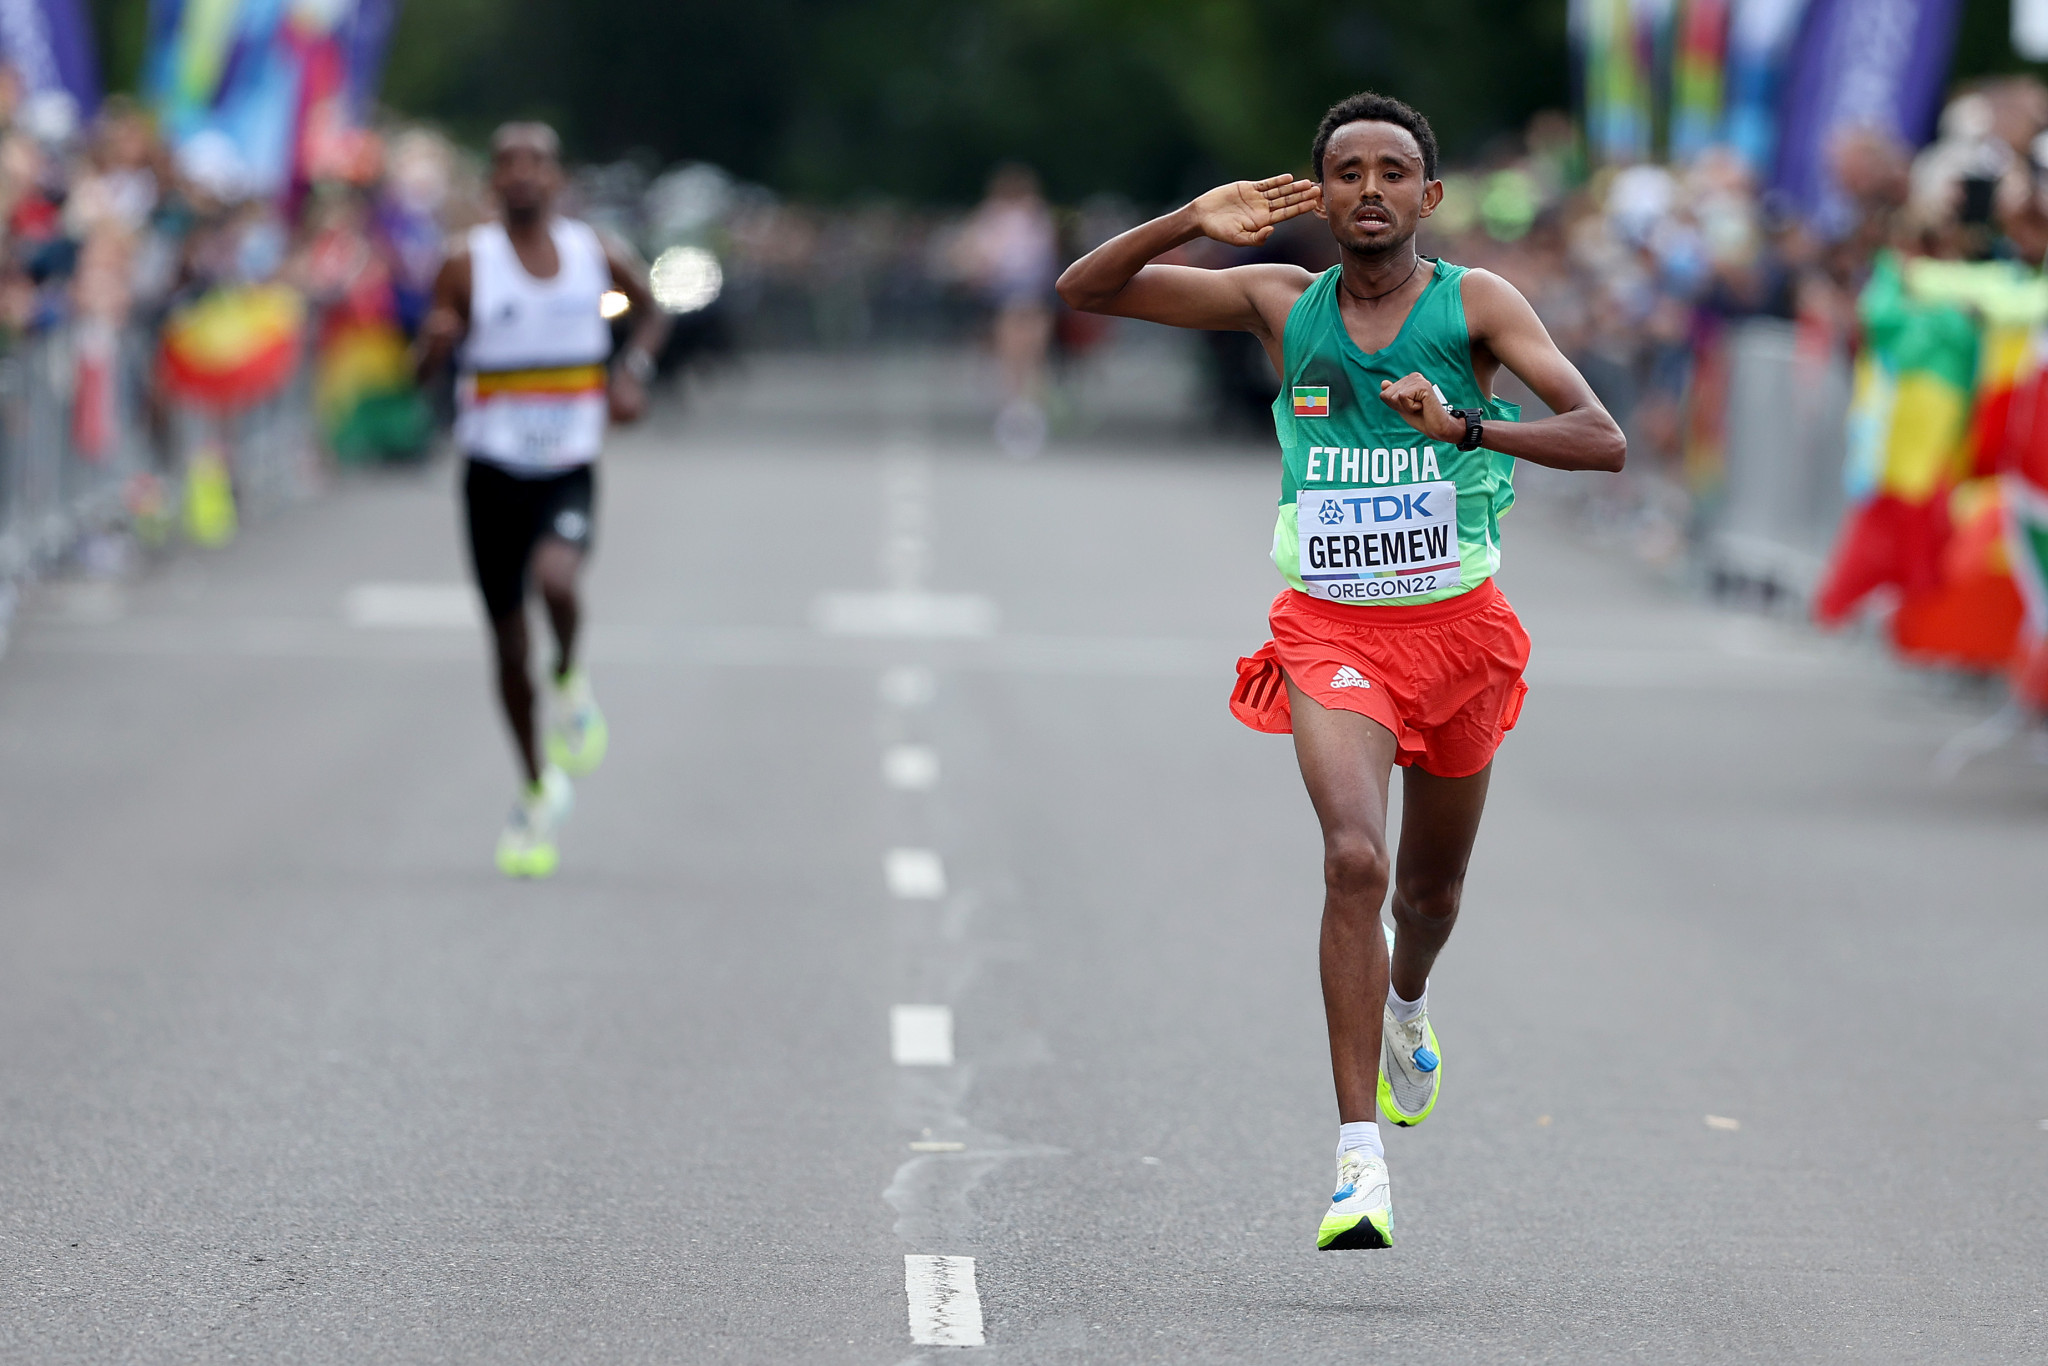 Tola's compatriot Mosinet Geremew won silver, pulling clear of Tokyo 2020 bronze medallist Bashir Abdi over the final kilometre to finish in 2:06.44 ©Getty Images